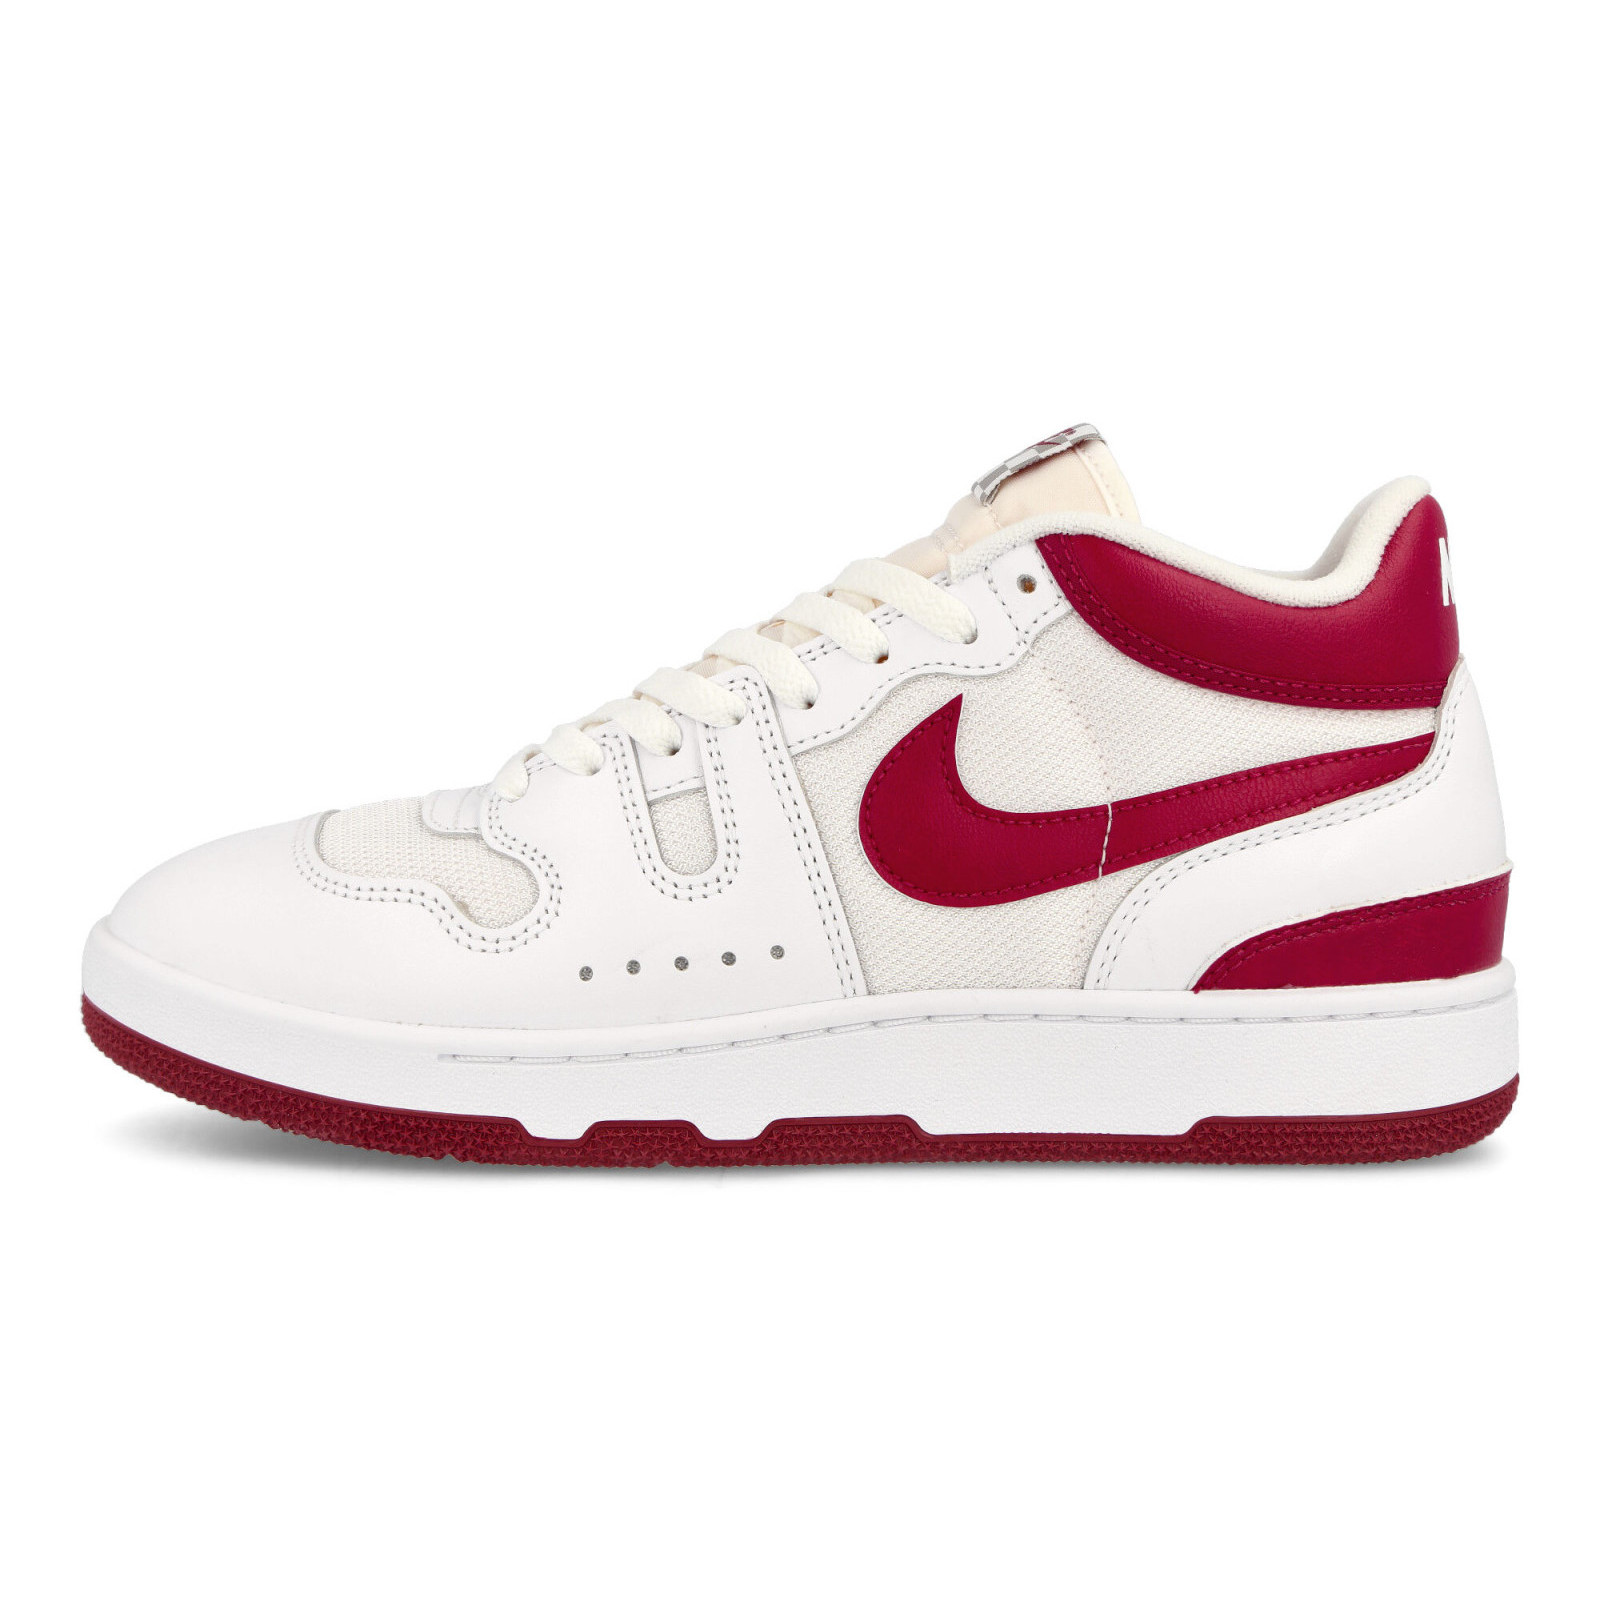 Nike Attack QS SP
« Red Crush »